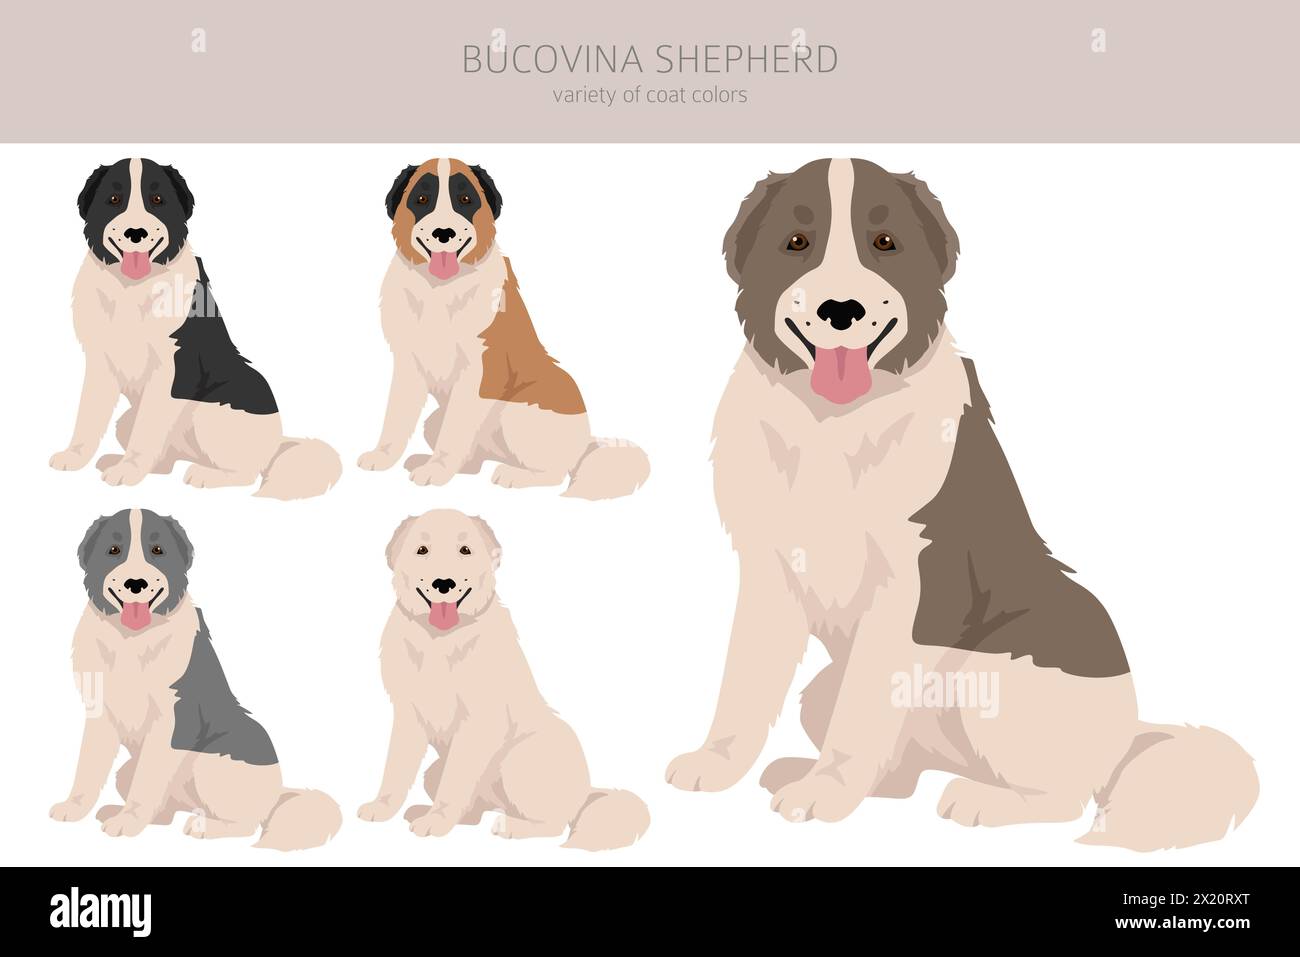 Bucovina shepherd clipart. Different coat colors and poses set.  Vector illustration Stock Vector